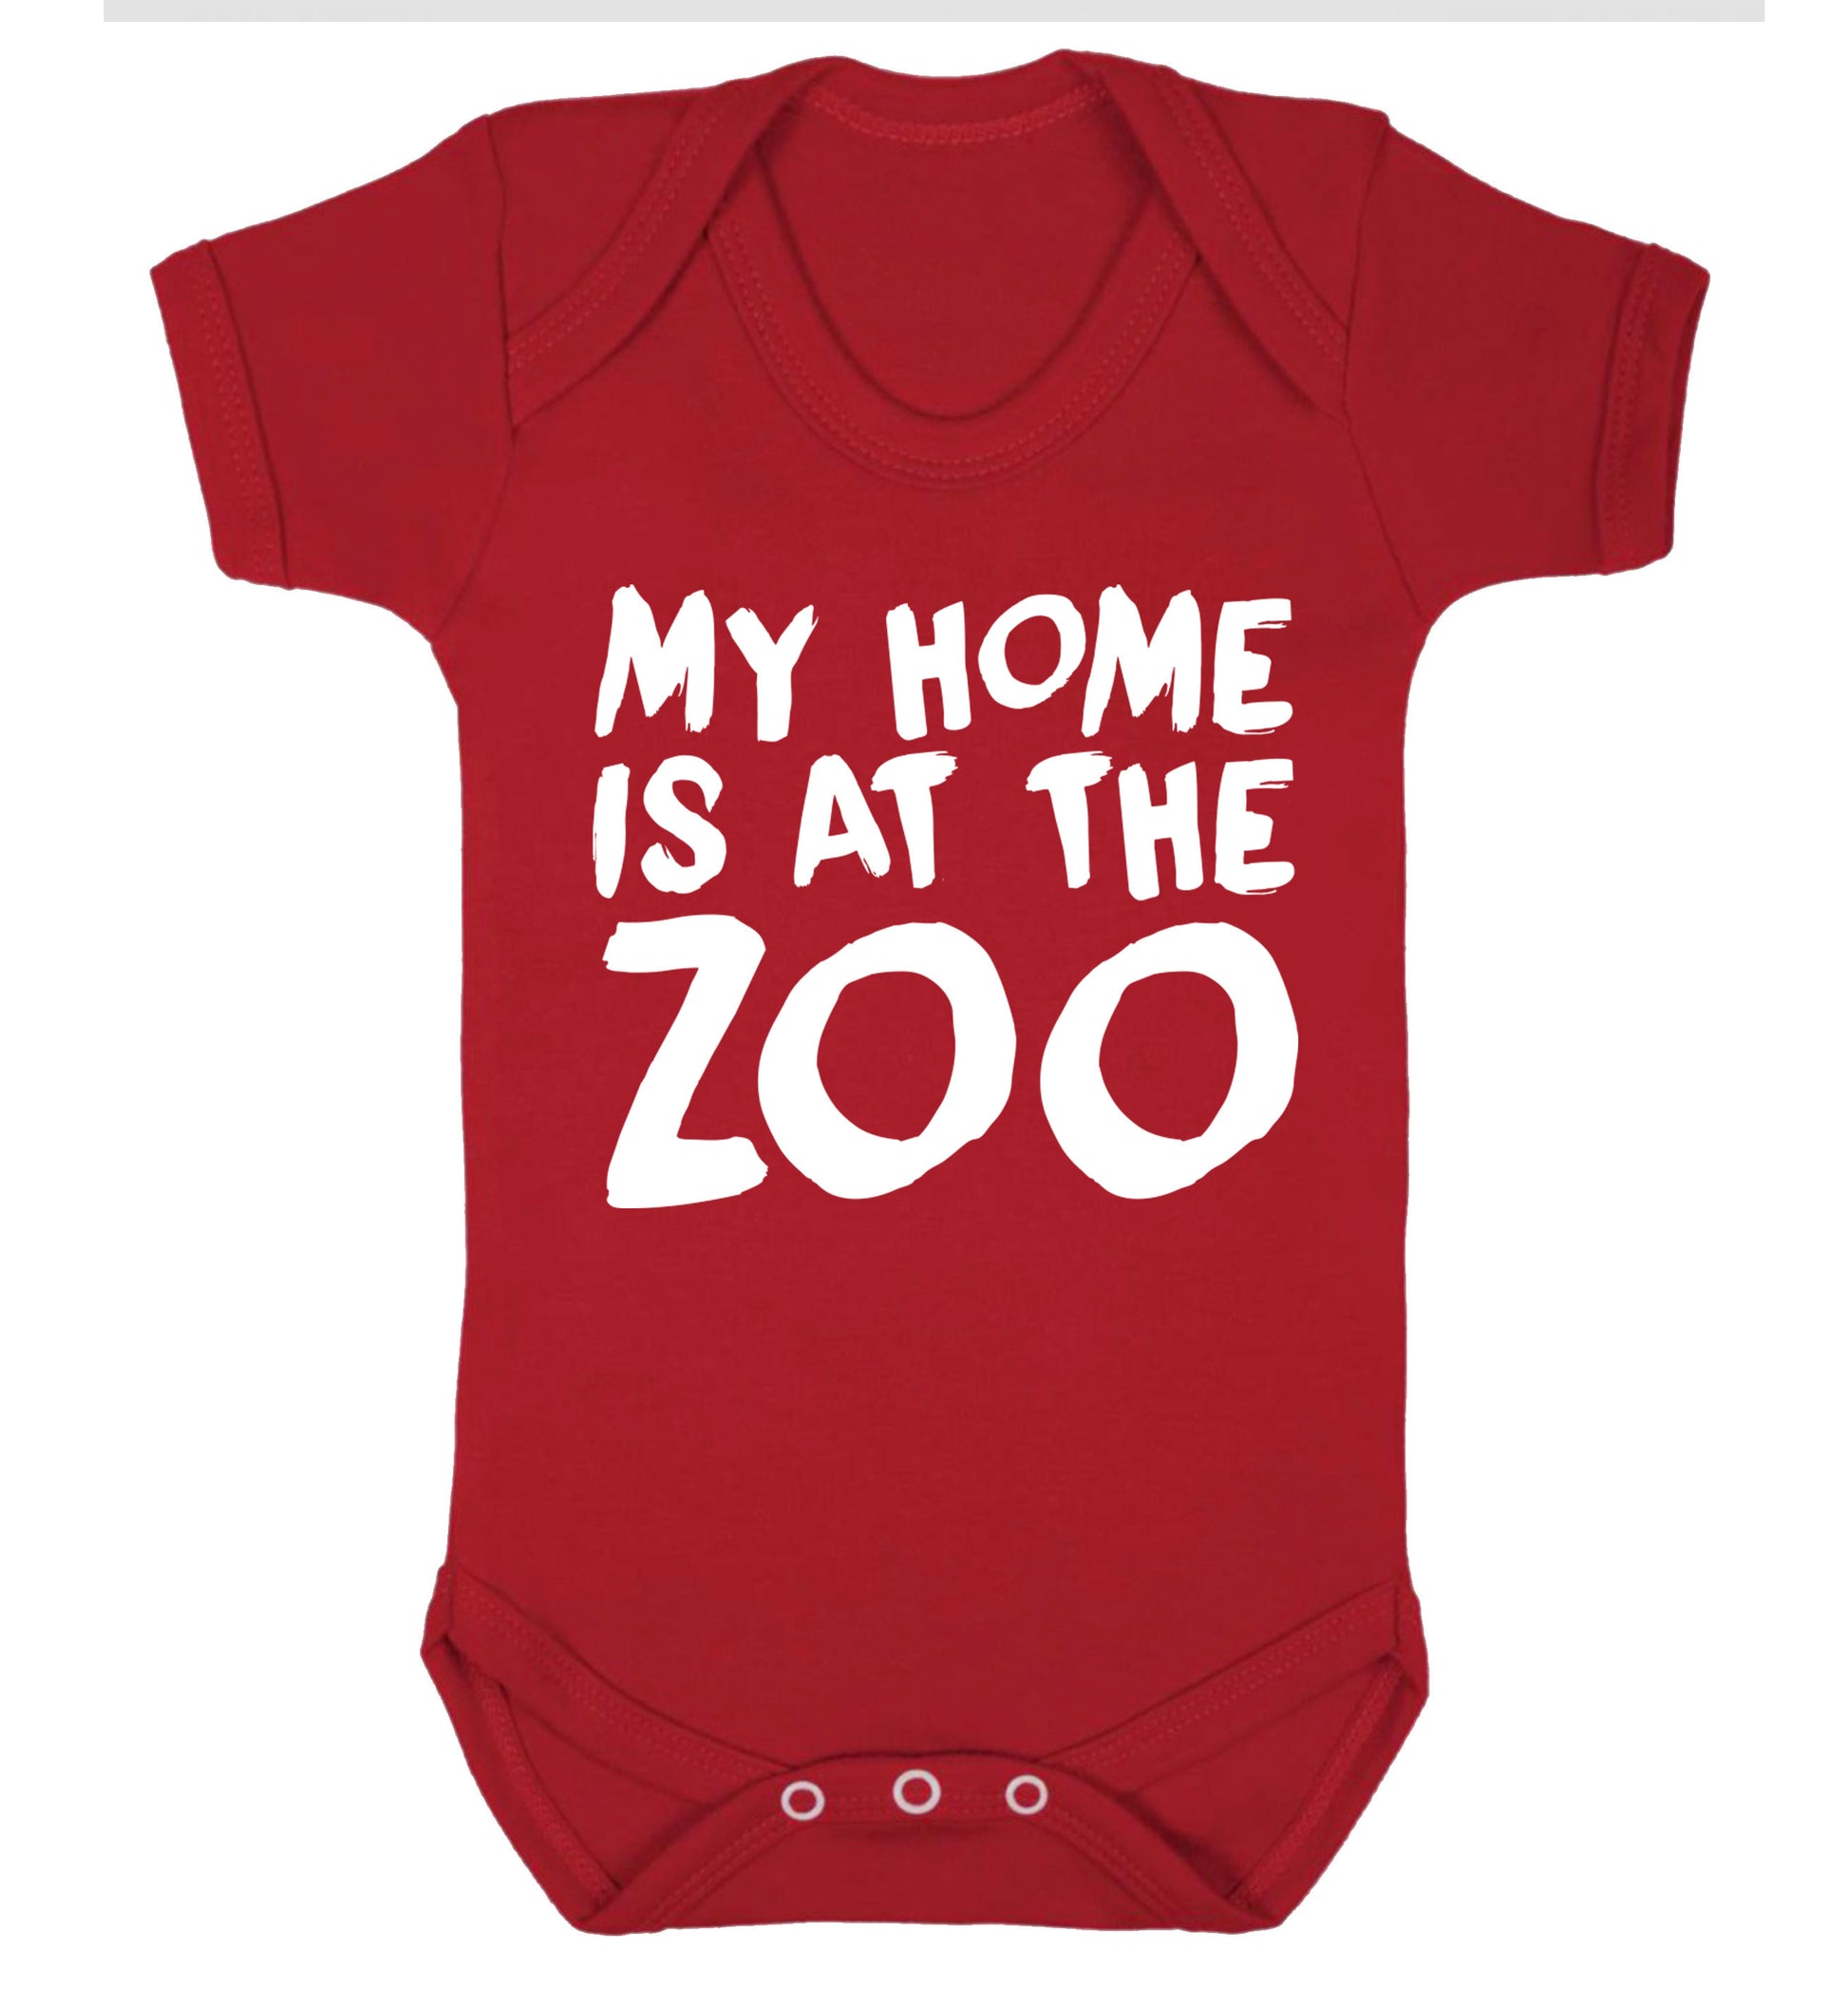 My home is at the zoo Baby Vest red 18-24 months